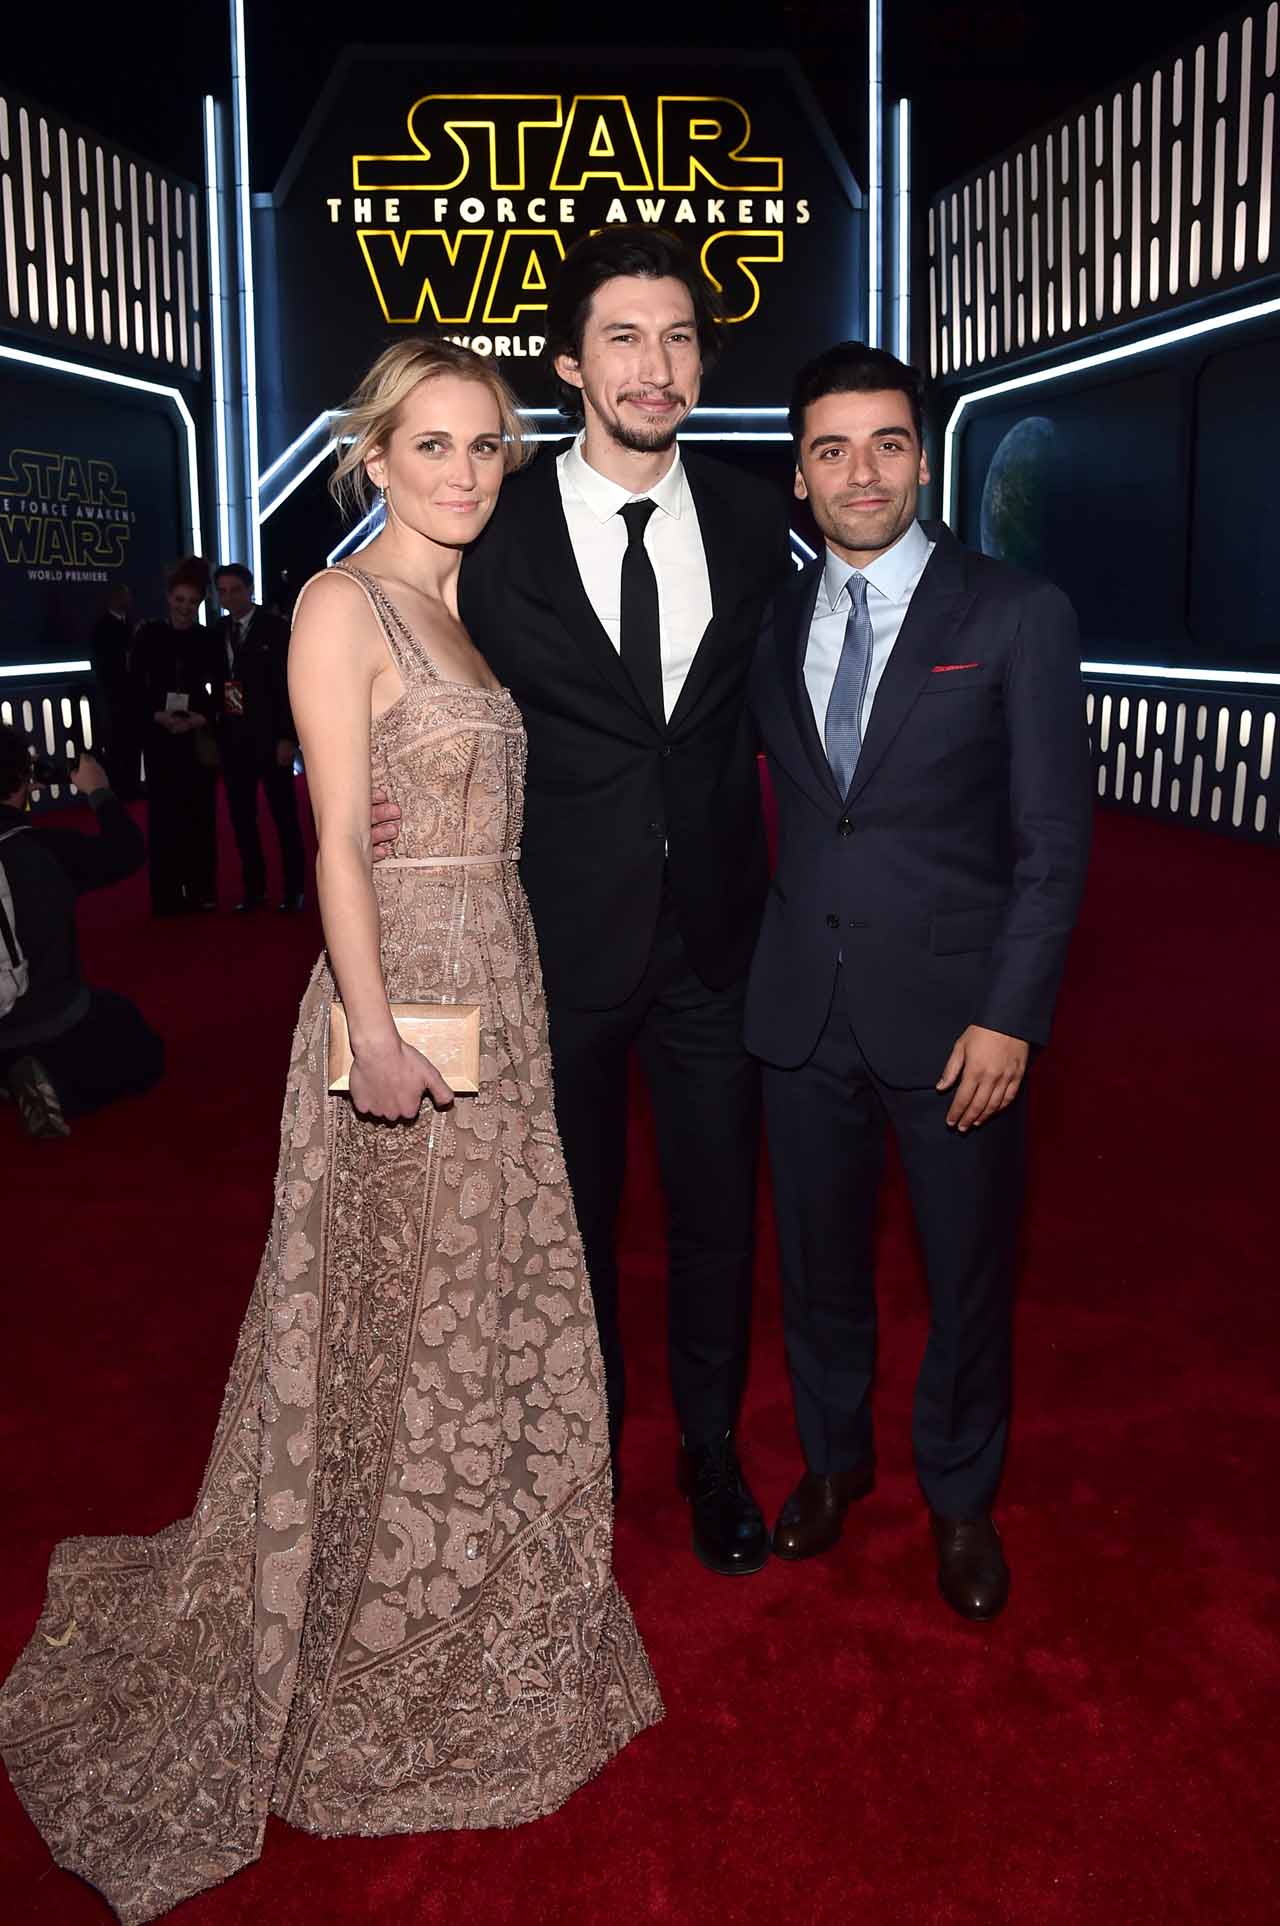 HOLLYWOOD, CA - DECEMBER 14: (L-R) Actors Joanne Tucker, Adam Driver and Oscar Isaac attend the World Premiere of ?Star Wars: The Force Awakens? at the Dolby, El Capitan, and TCL Theatres on December 14, 2015 in Hollywood, California.  (Photo by Alberto E. Rodriguez/Getty Images for Disney) *** Local Caption *** Adam Driver;Joanne Tucker;Oscar Isaac